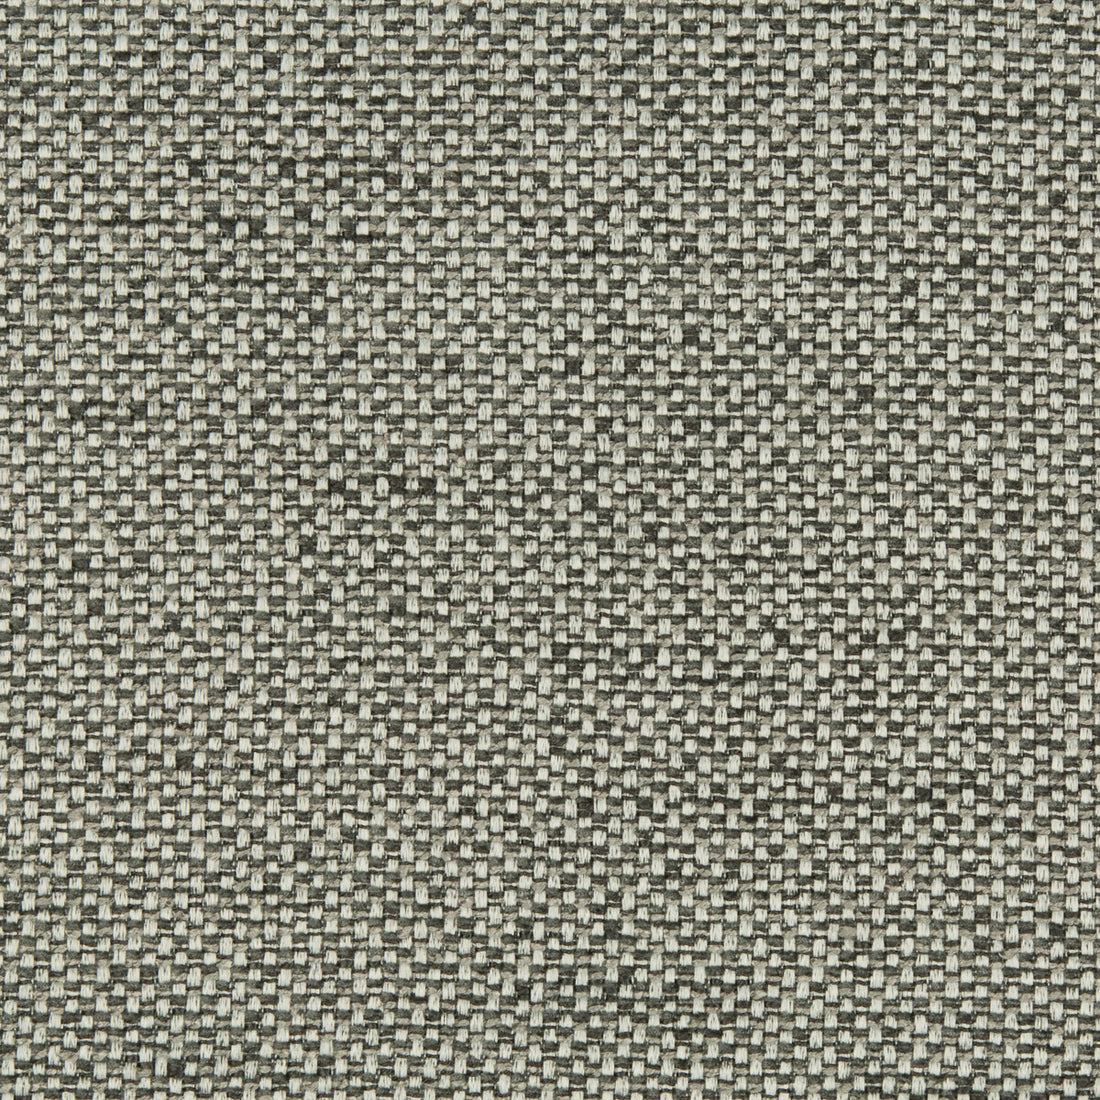 Kravet Design fabric in 34976-21 color - pattern 34976.21.0 - by Kravet Design in the Performance Crypton Home collection